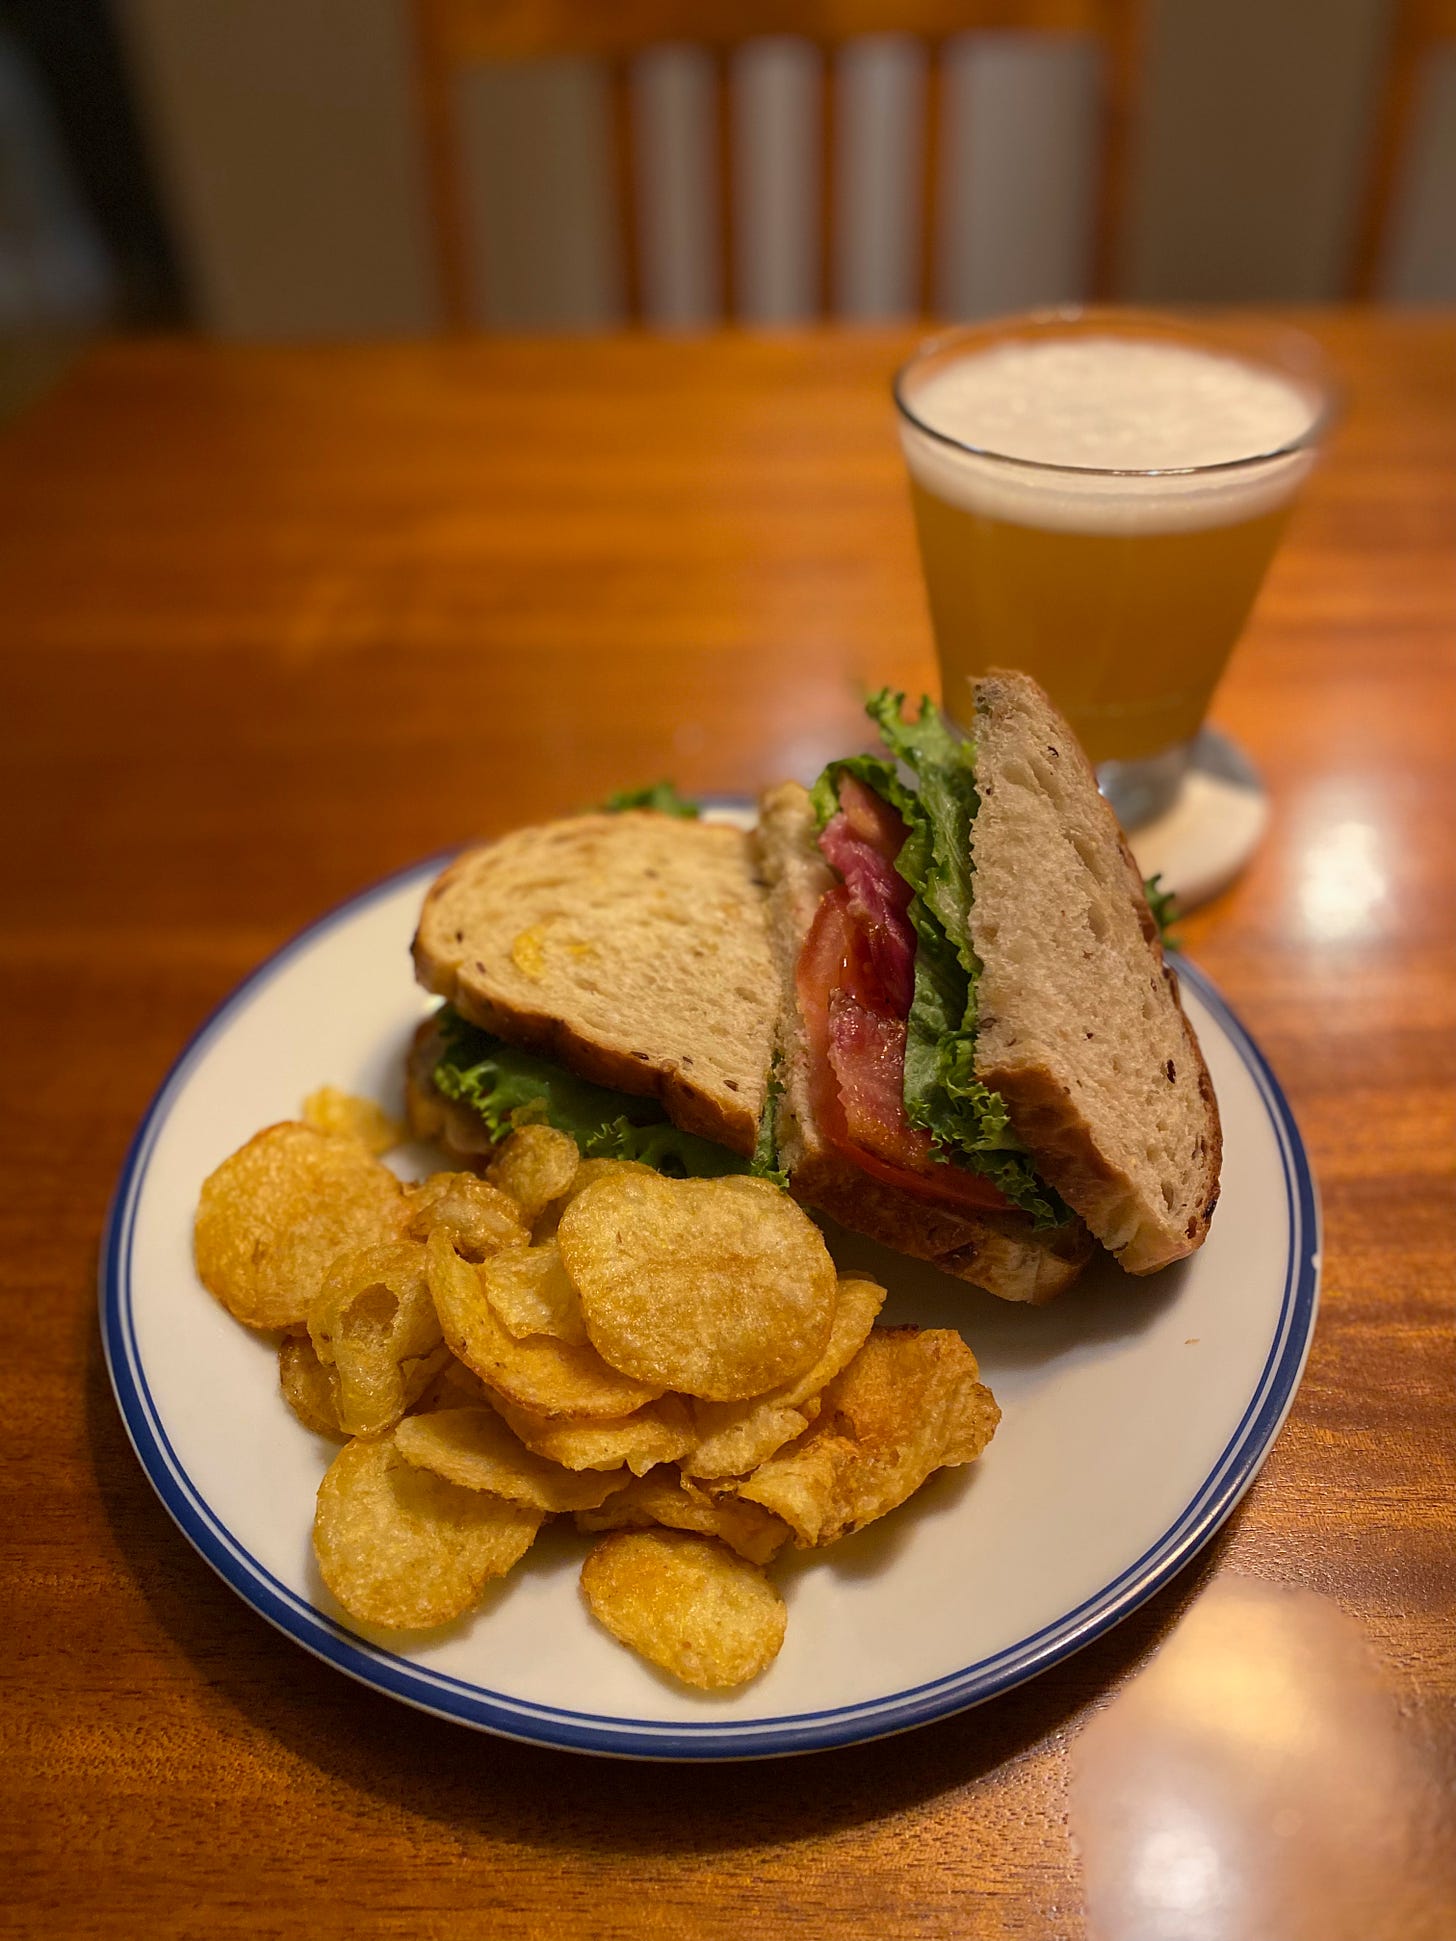 A white plate with a blue rim holds a sandwich on grainy sourdough, sliced in half. One open half faces upright and inside is bacon, lettuce, and tomato. In front of it is a pile of potato chips, and in the background on a coaster is a glass of beer.